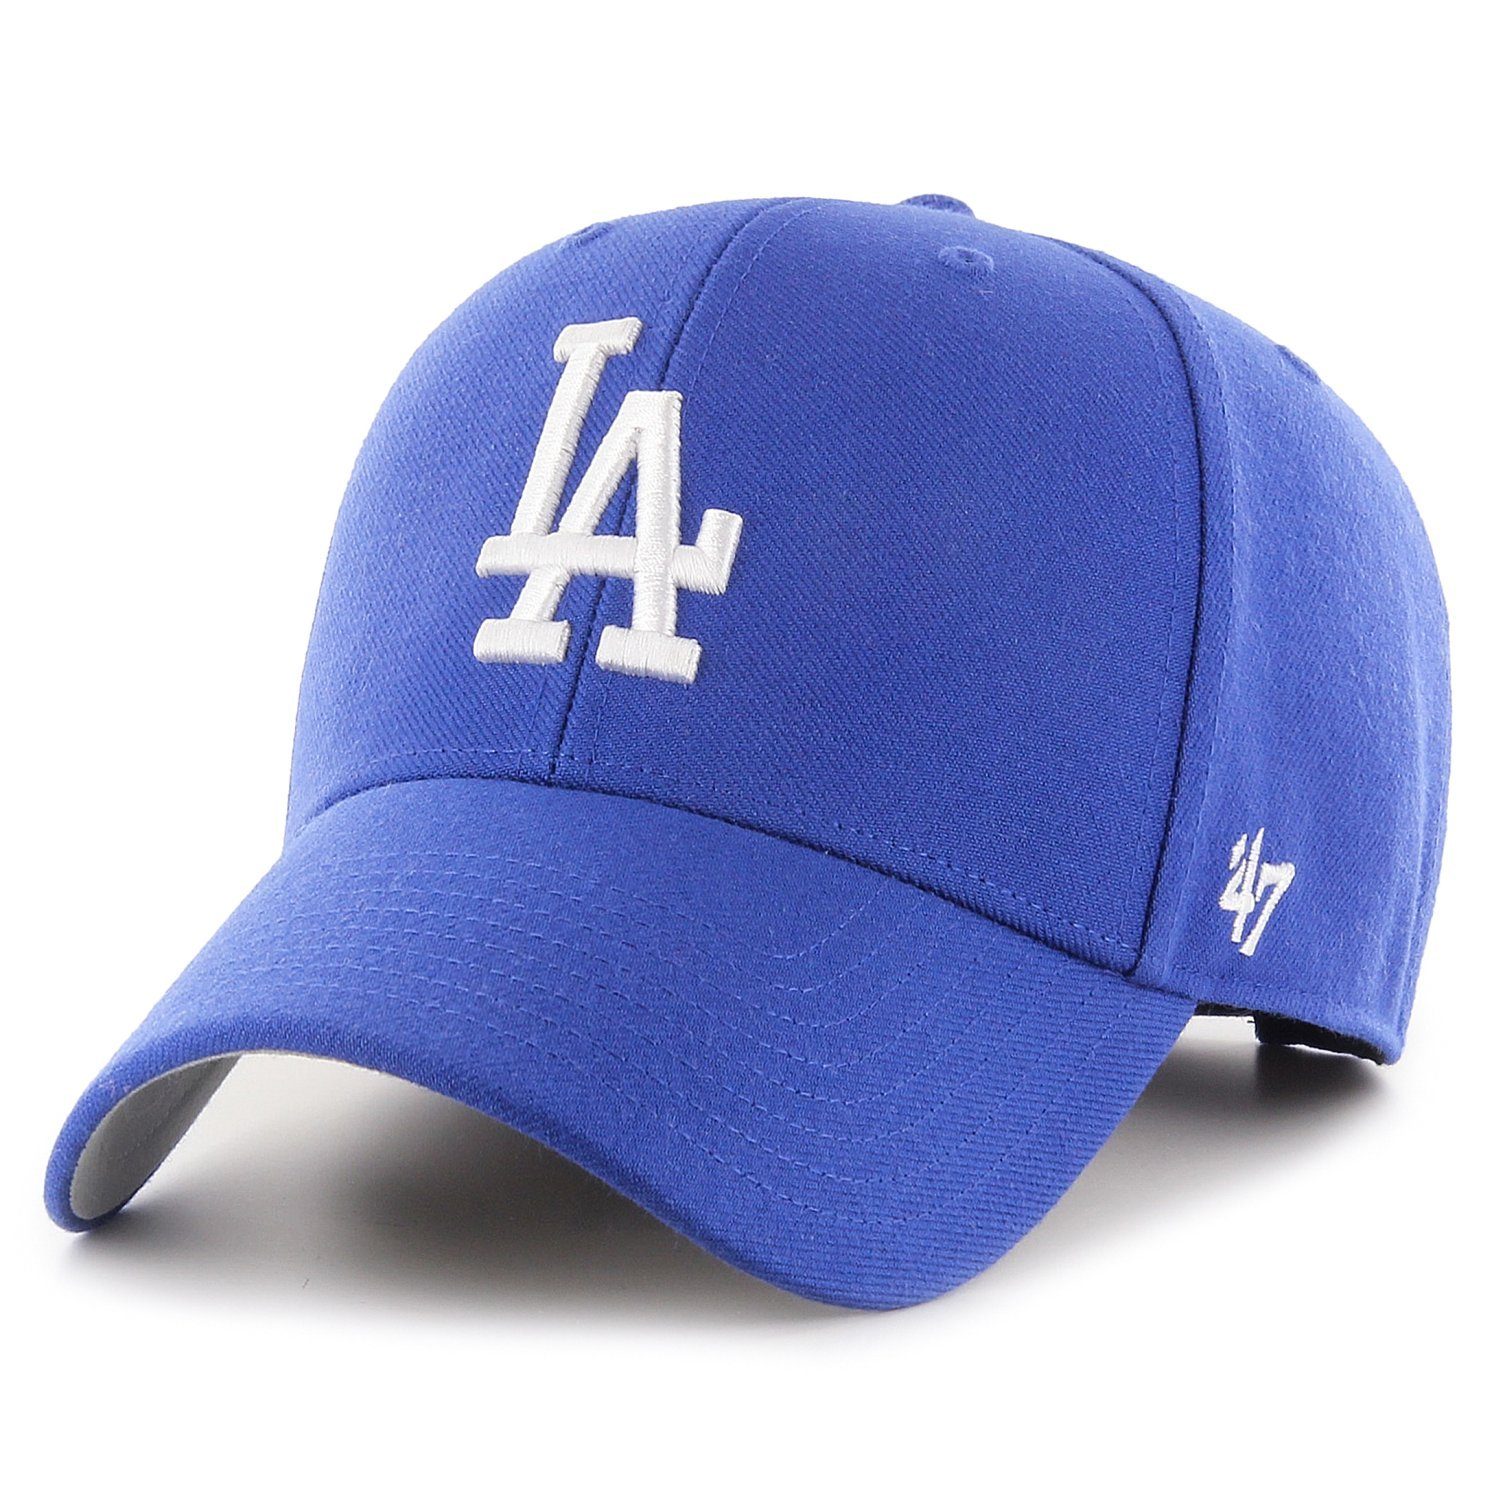 '47 Brand Trucker Cap Relaxed Fit MLB Los Angeles Dodgers